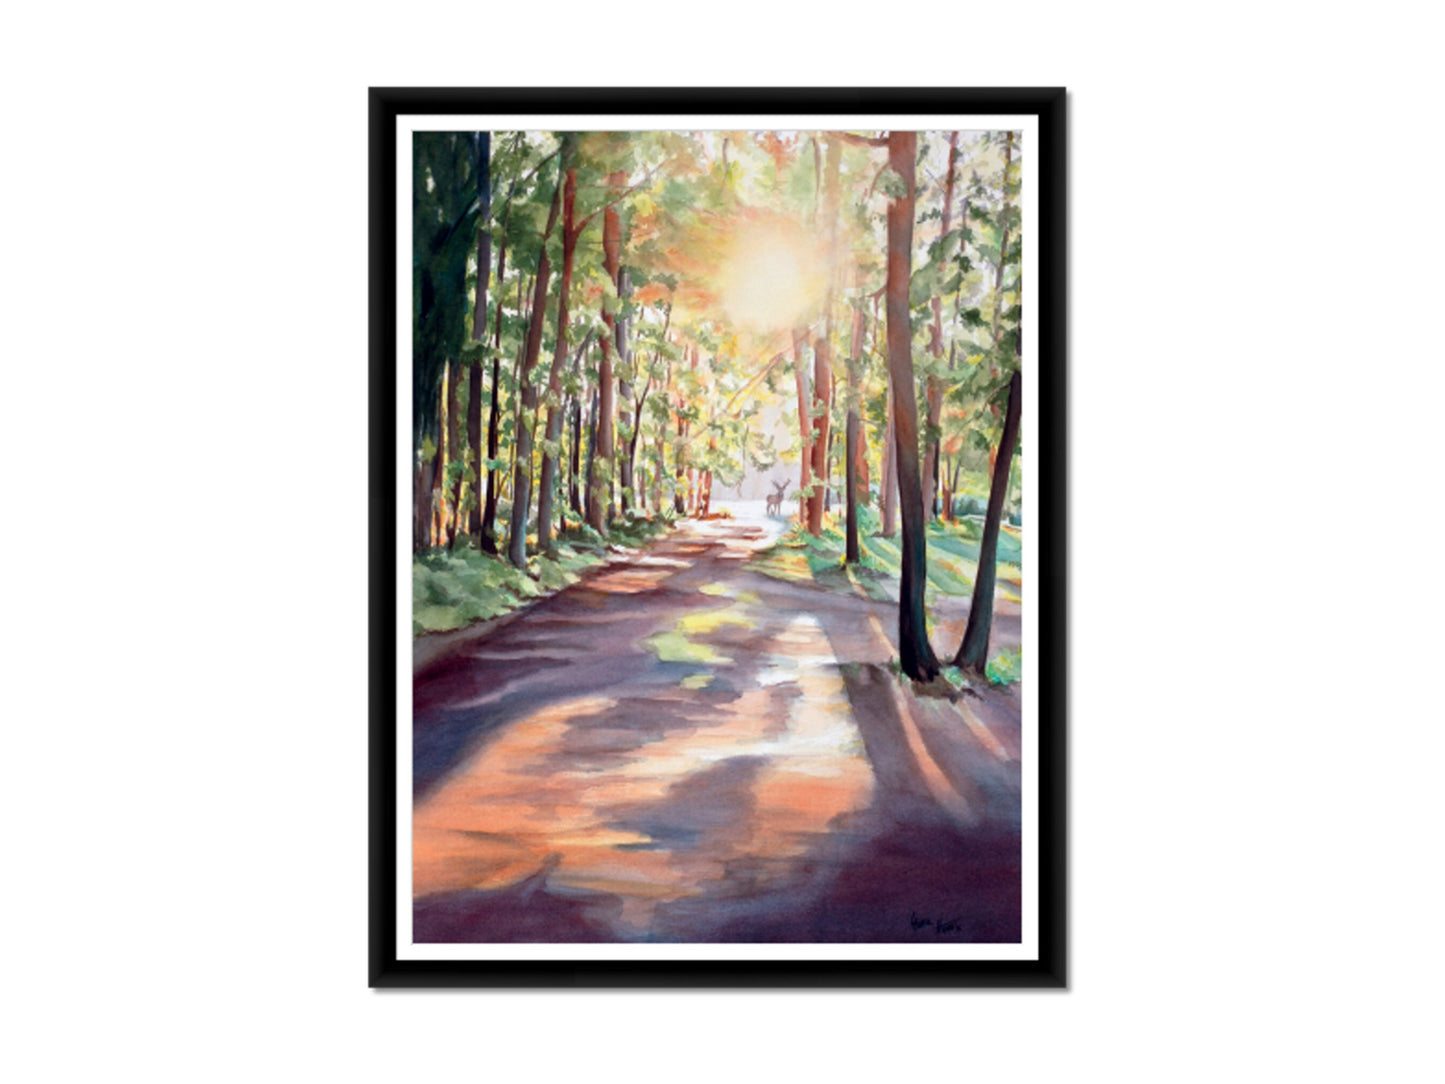 Large Canvas Art, Watercolor Painting, Forest Wall Art, Landscape Painting, Oversized Framed Wall Art, Art Print,